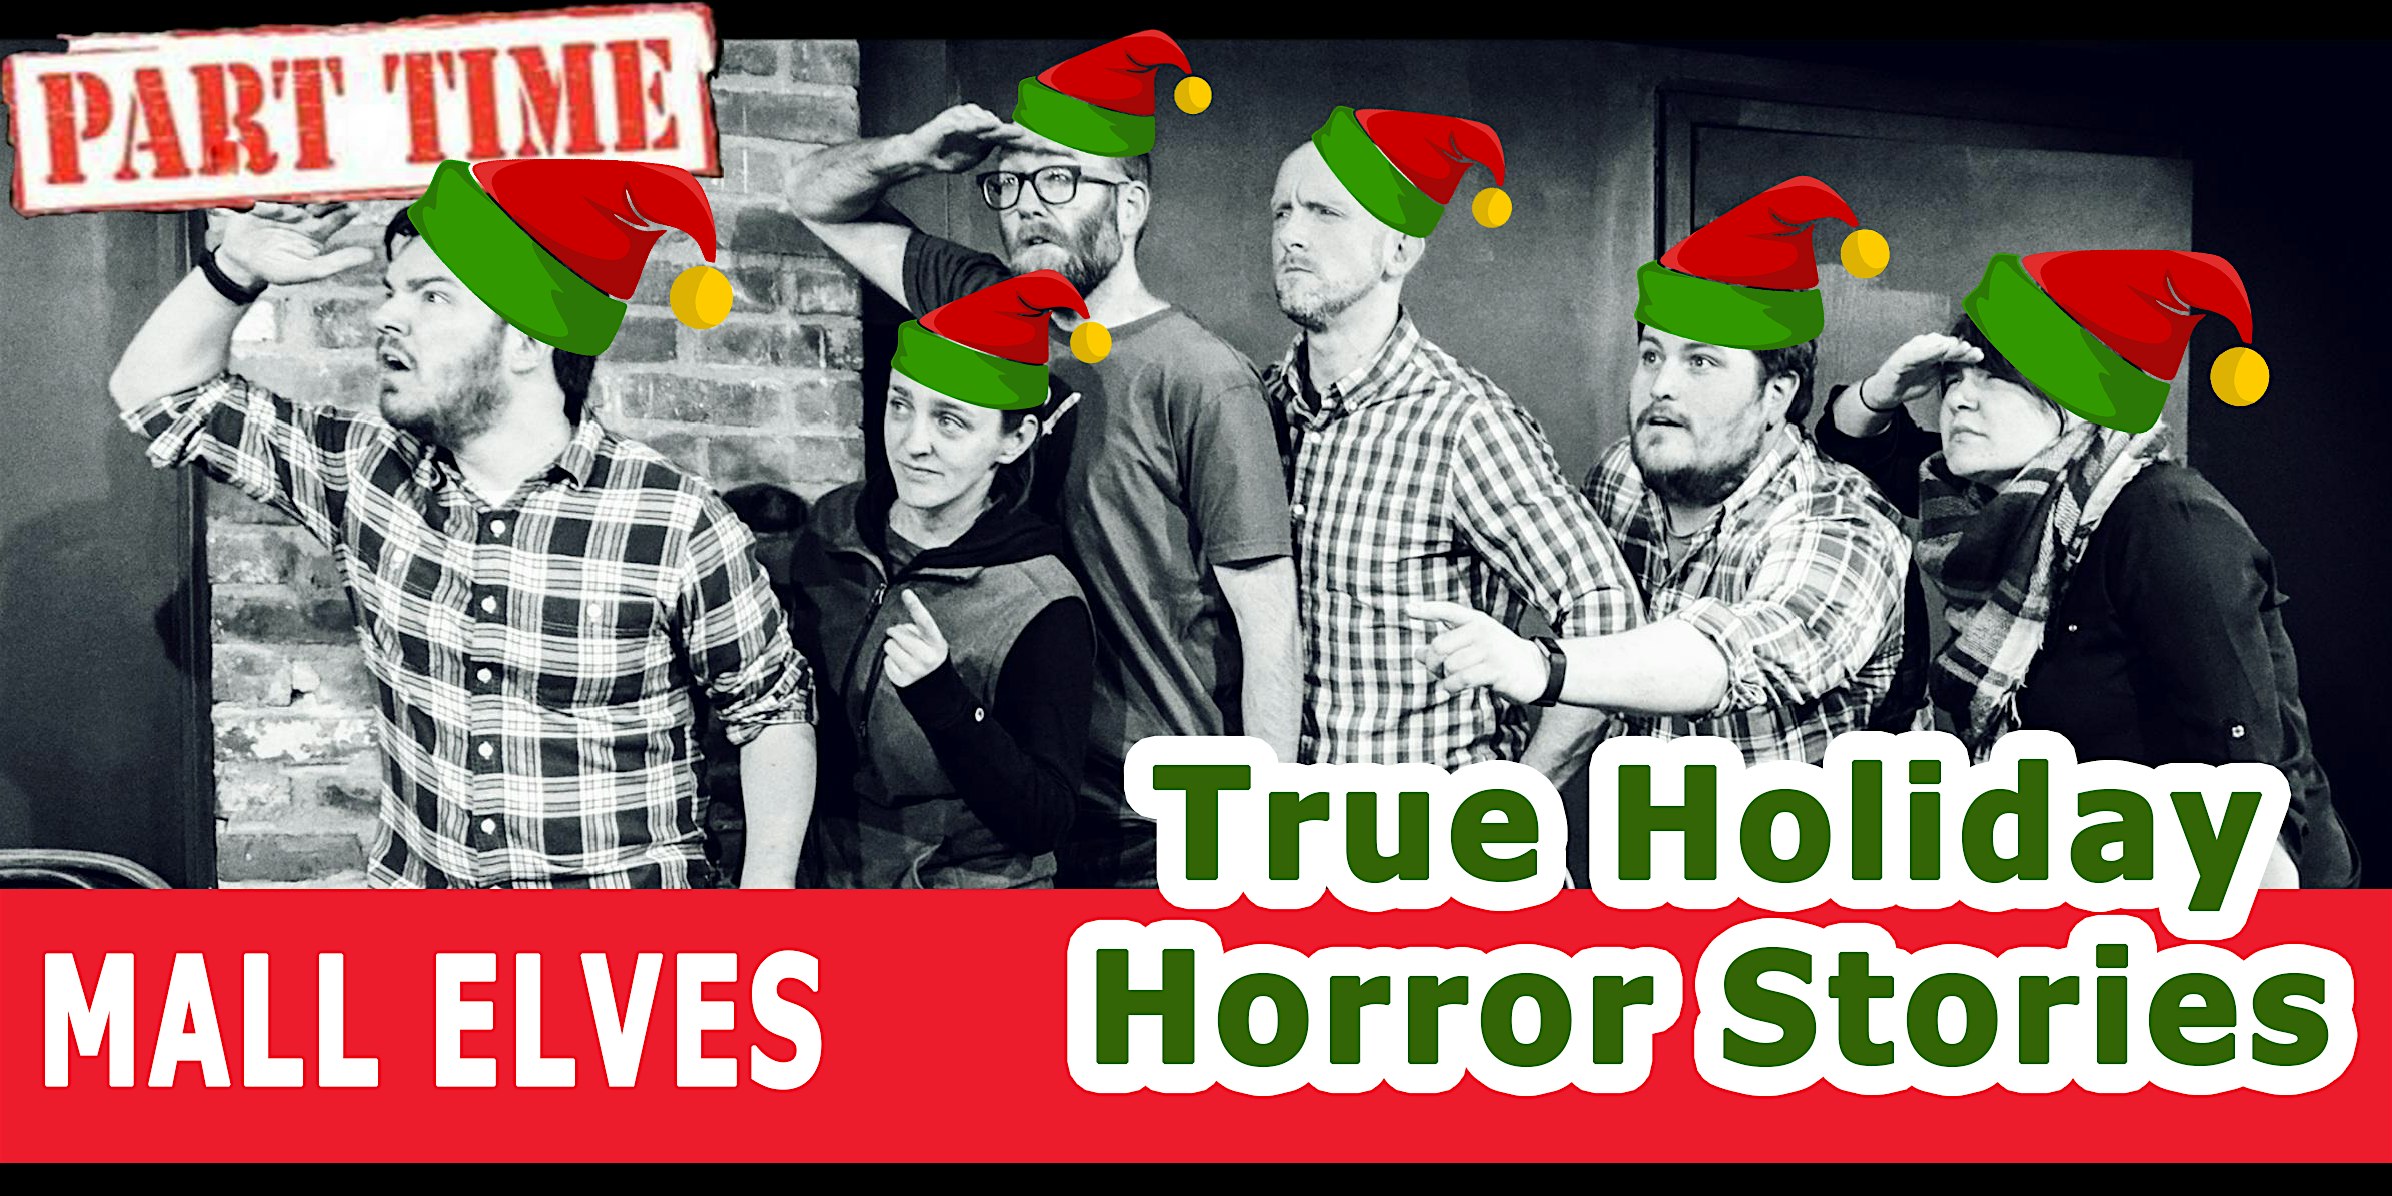 YOUR True Holiday Horror Stories feat. Part Time Mall Elves